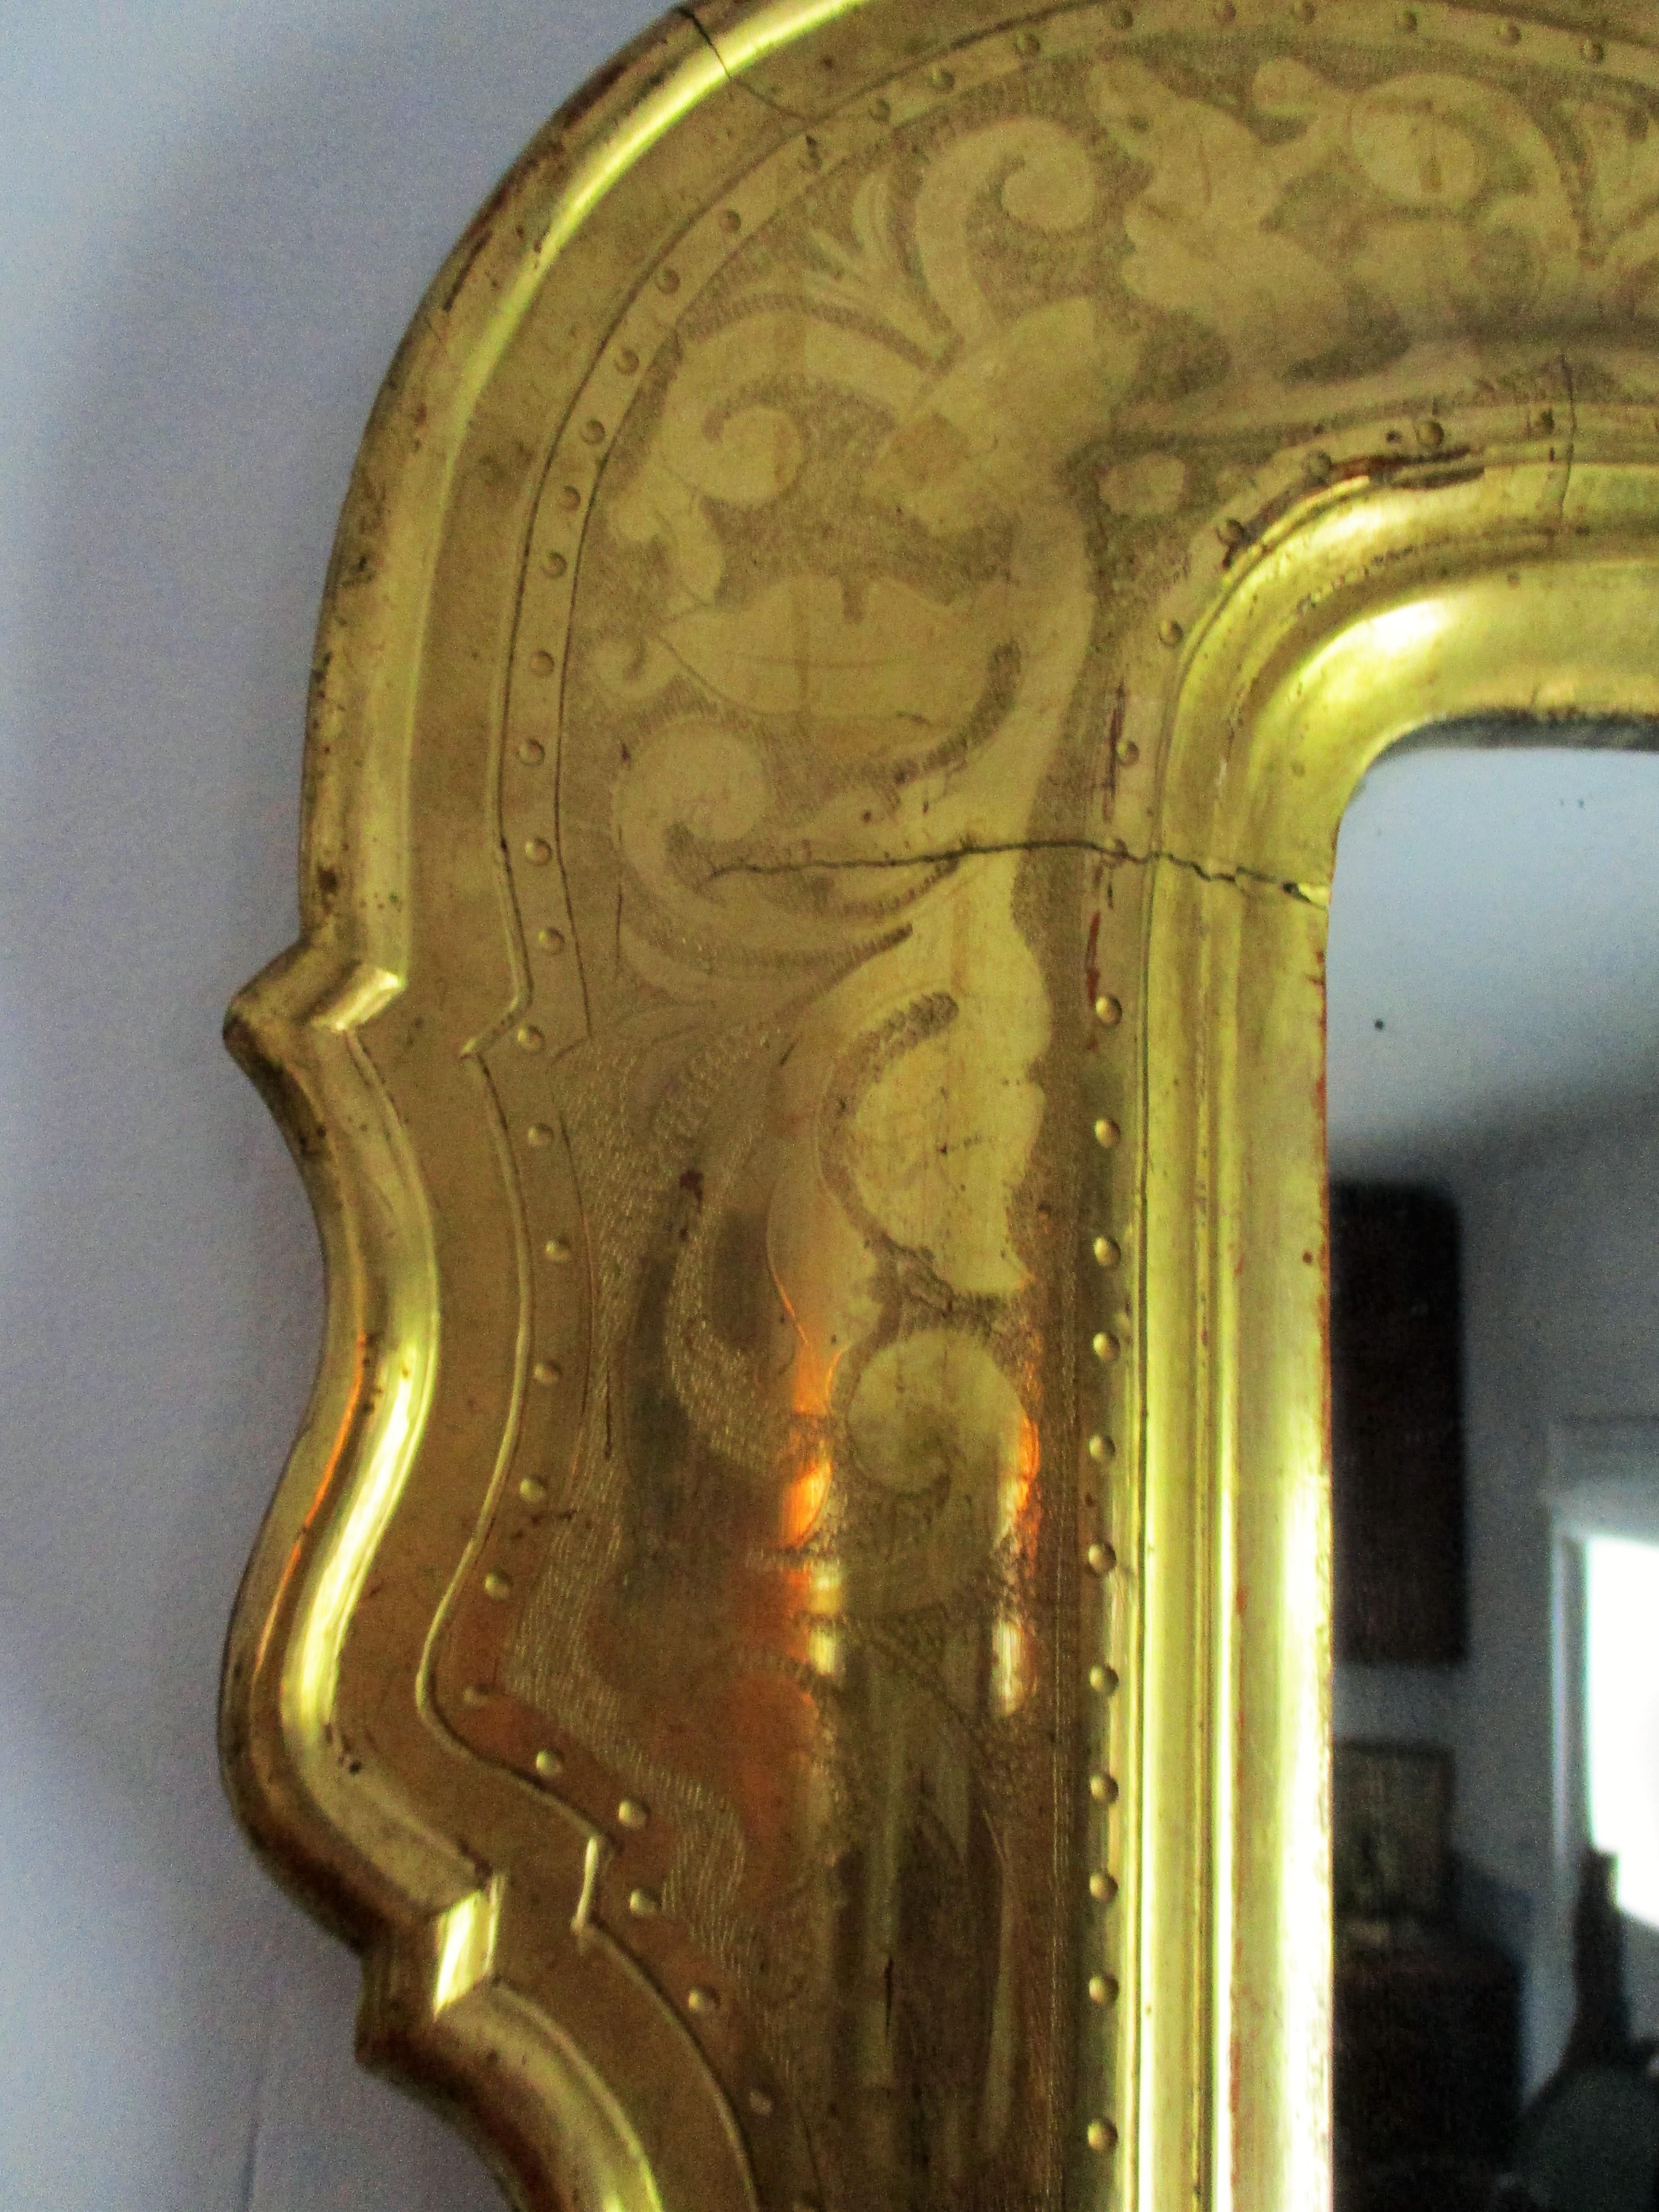 Gorgeous Italian Genovese mid-19th century etched gold leaf mirror with original mercury glass.